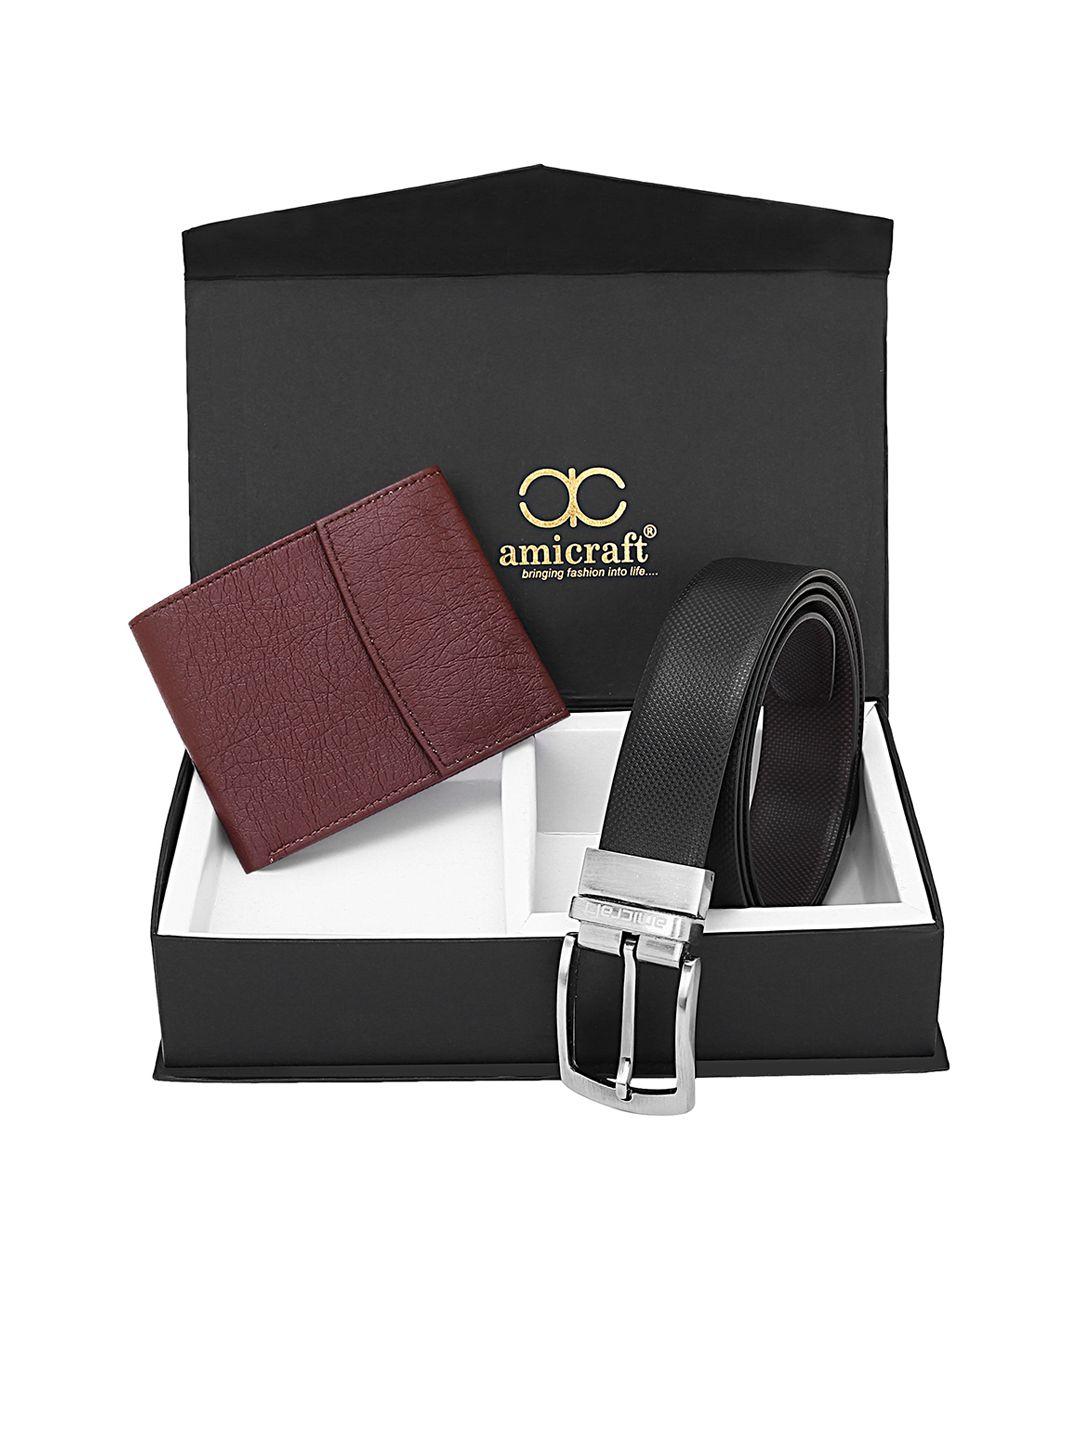 amicraft men black & brown solid accessory gift set